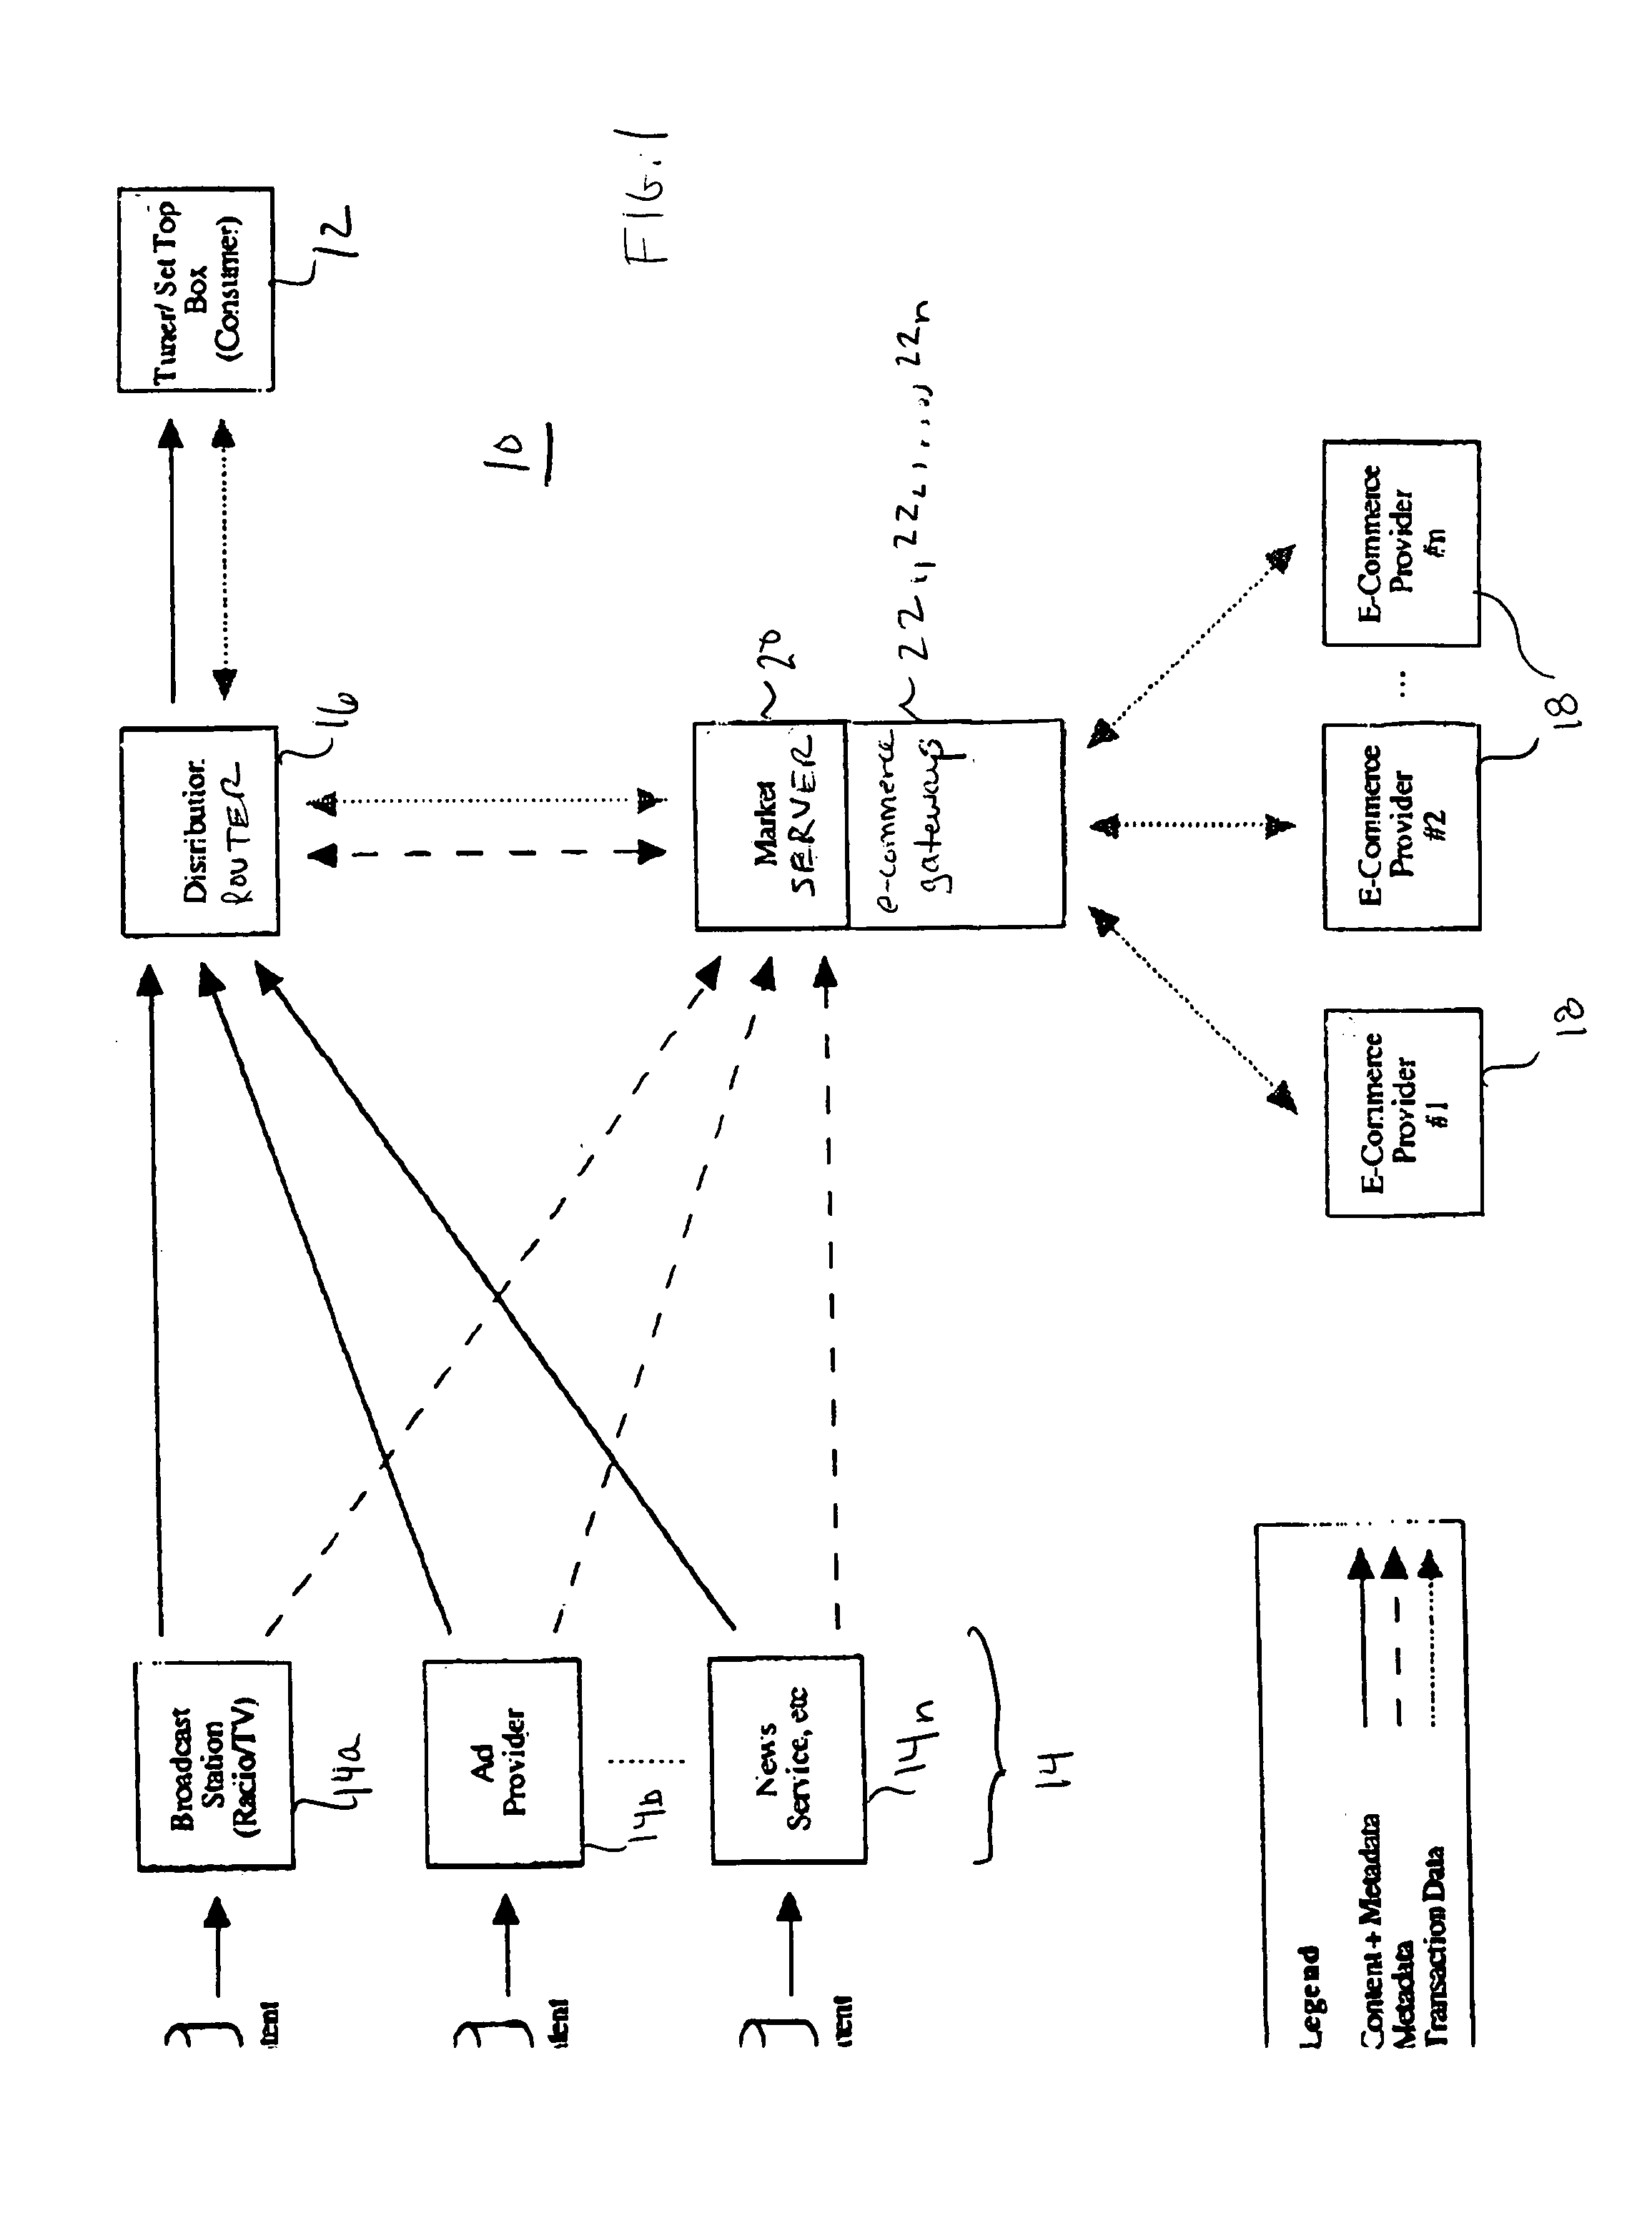 Content distribution system for generating content streams to suit different users and facilitating e-commerce transactions using broadcast content metadata